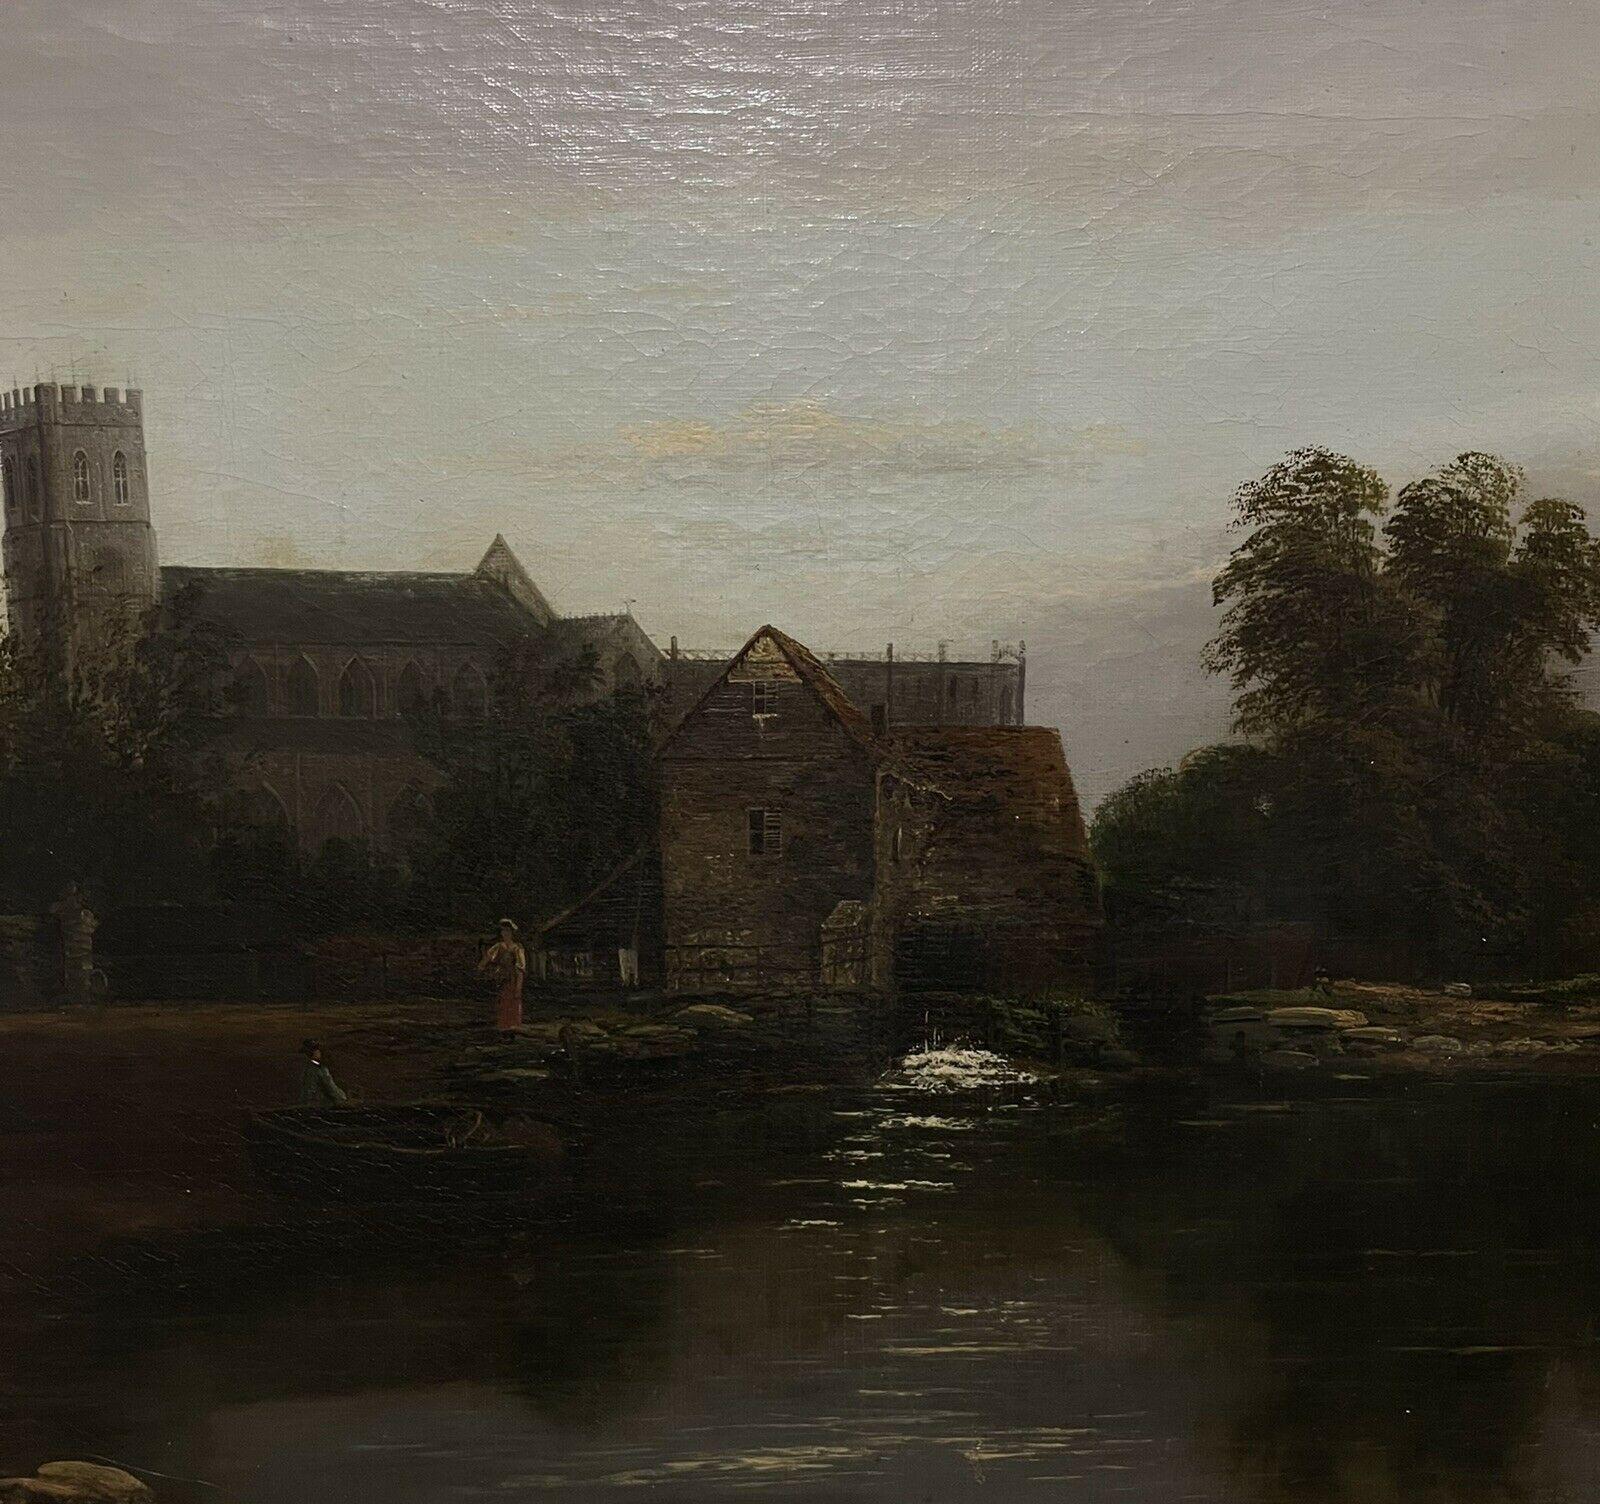 Antique British Signed Oil on Canvas Figures on River by Old Watermill Church - Black Landscape Painting by James Allan